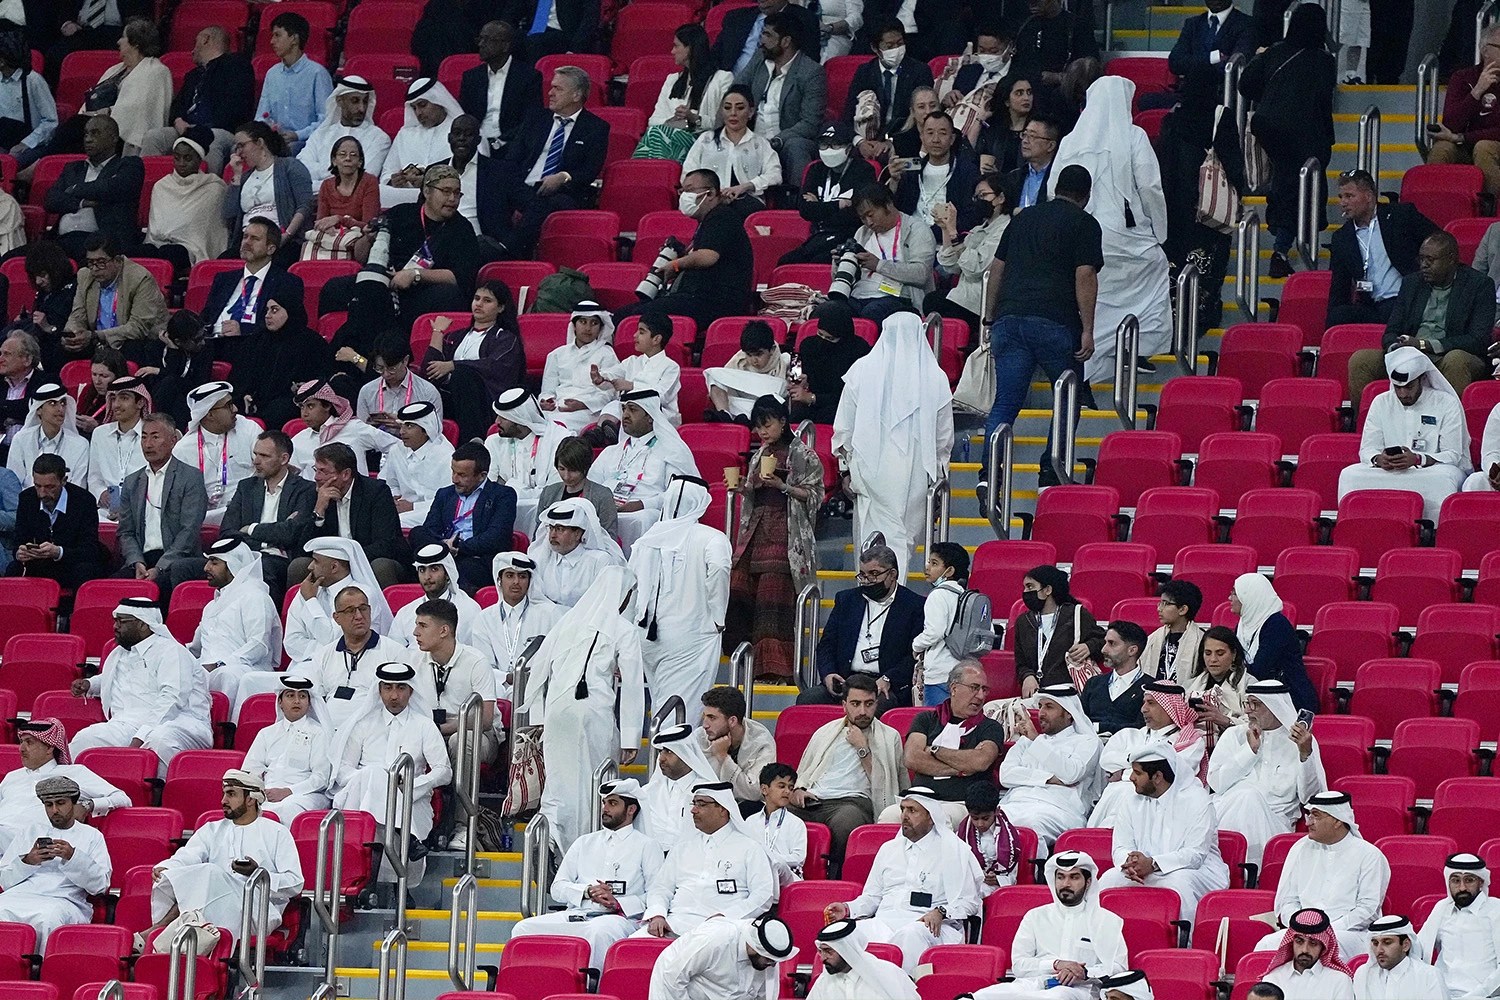 Fans wearing Thobes, the traditional dress of the Arabian Gulf region, while watching a World Cup match